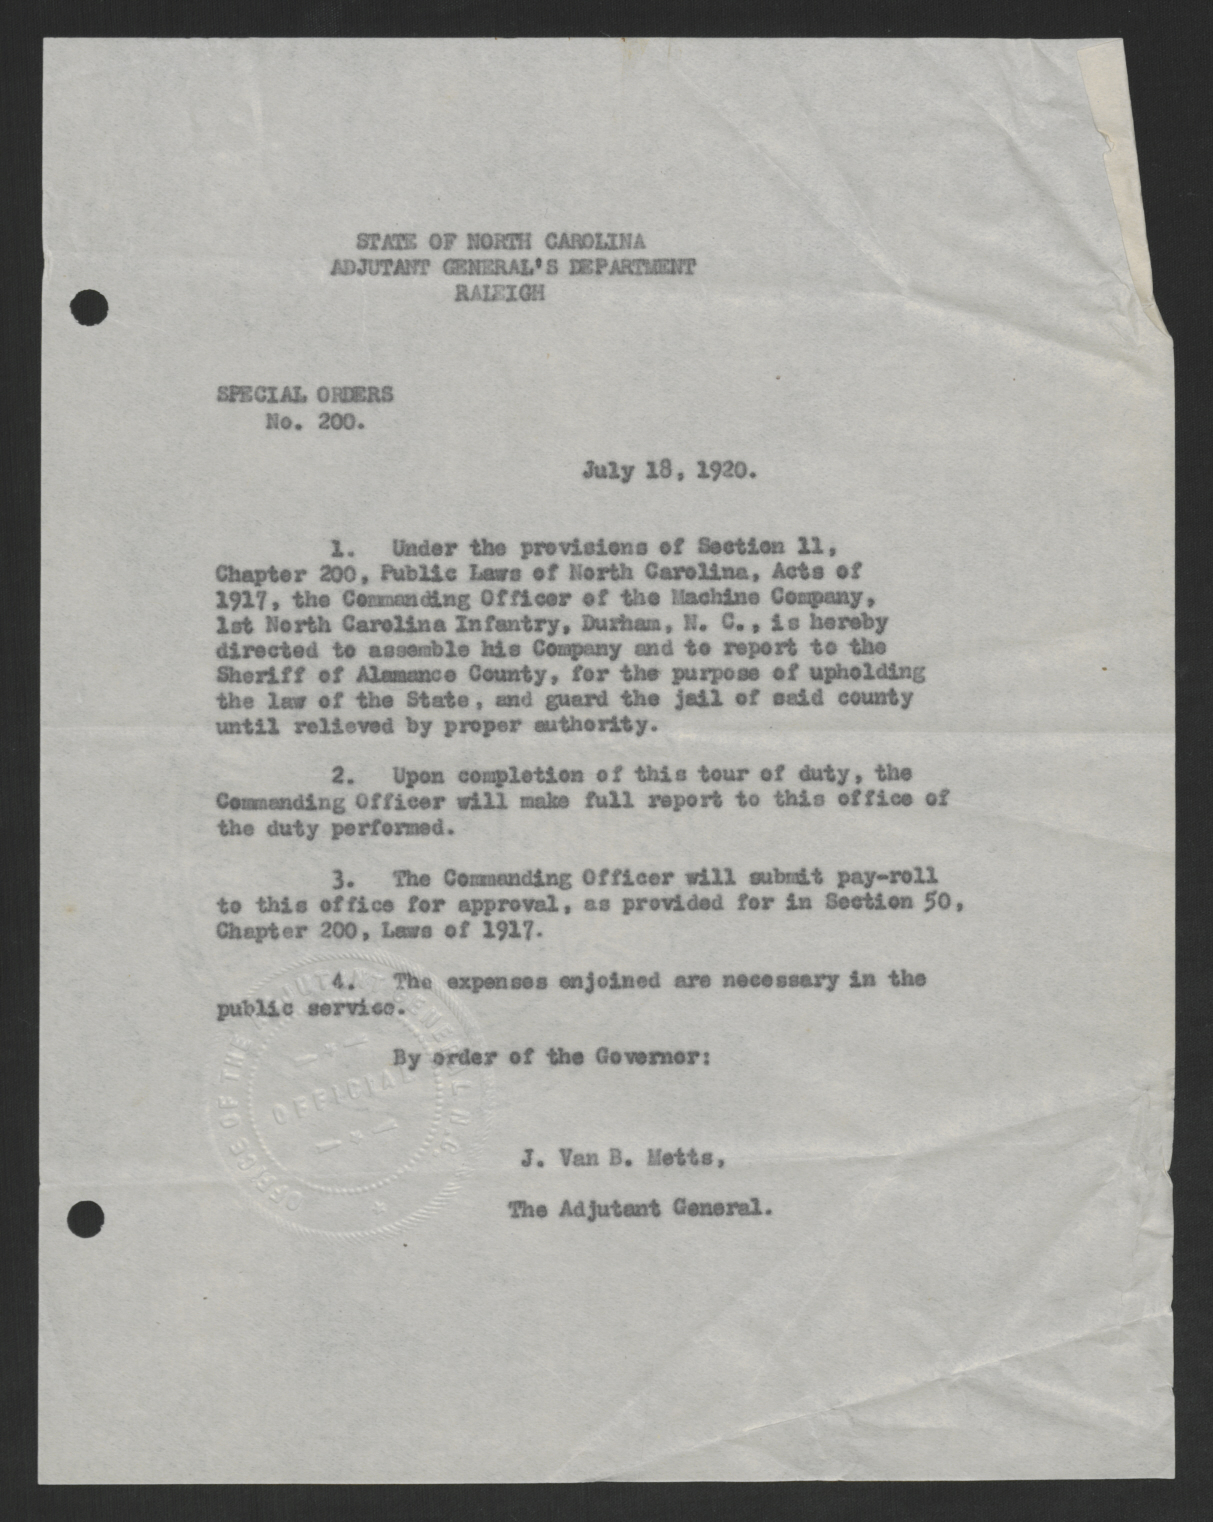 Special Orders No. 200, July 18, 1920